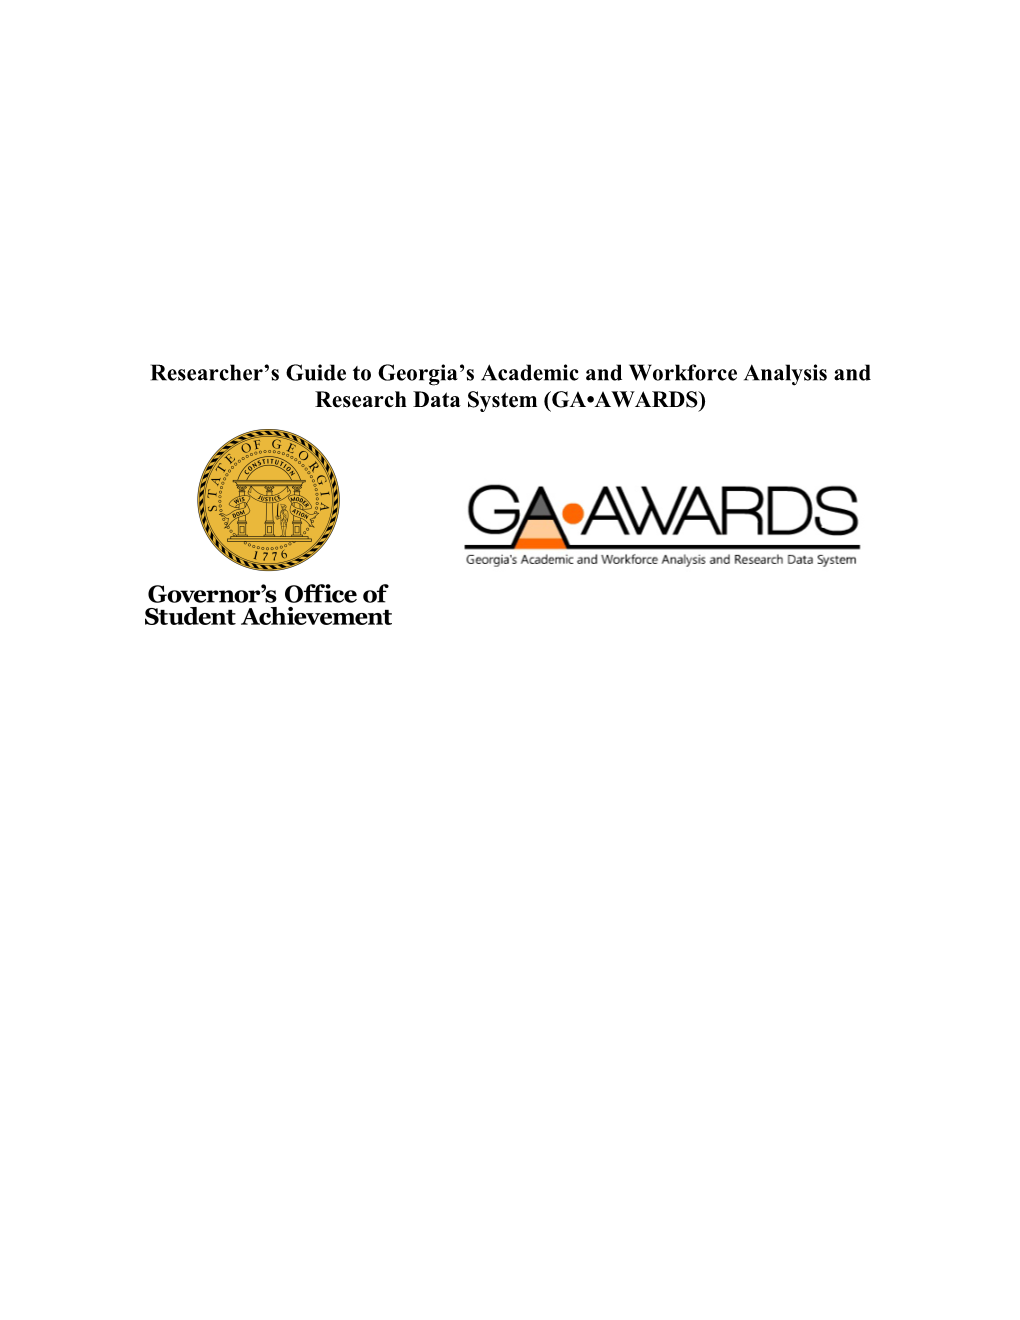 Researcher's Guide to GA•AWARDS Data